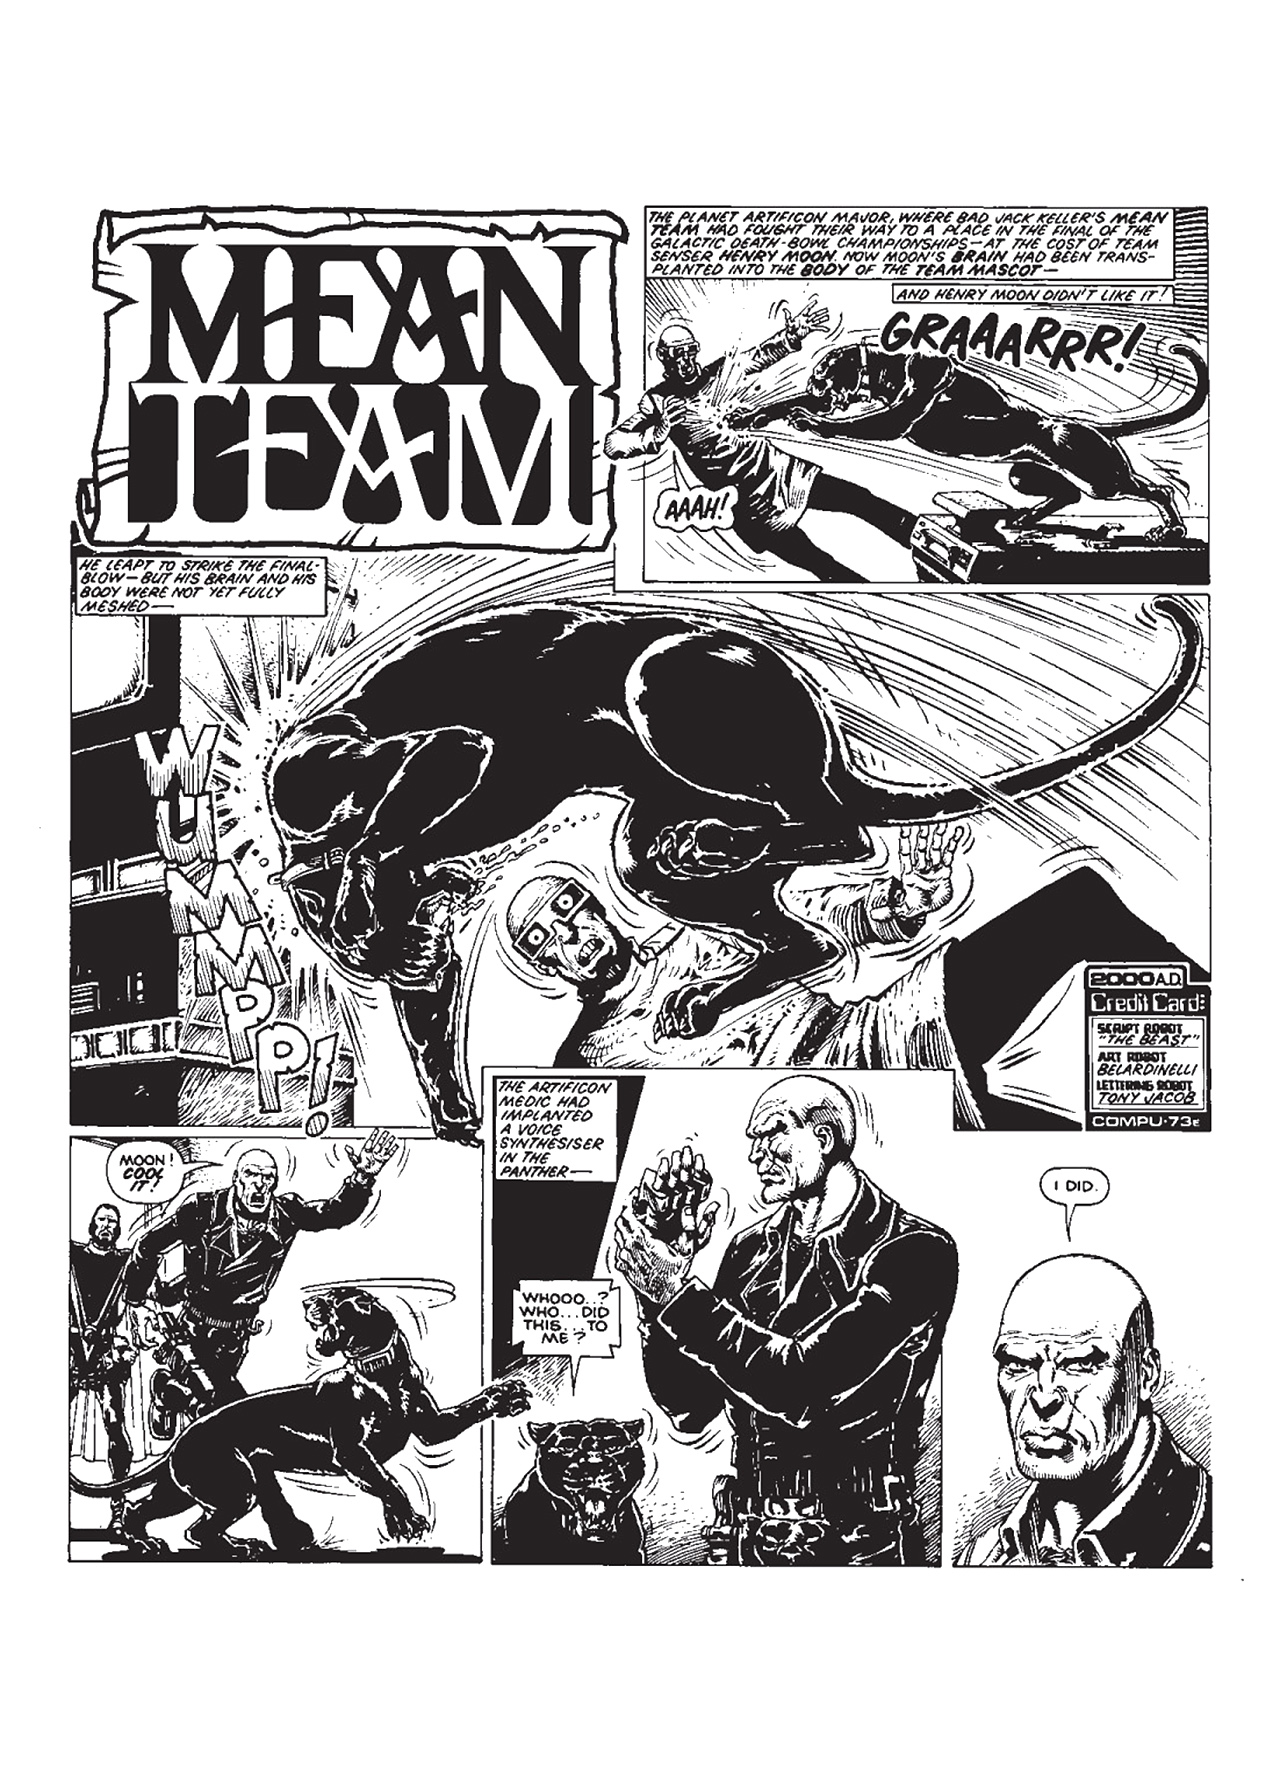 Read online Mean Team comic -  Issue # TPB - 68